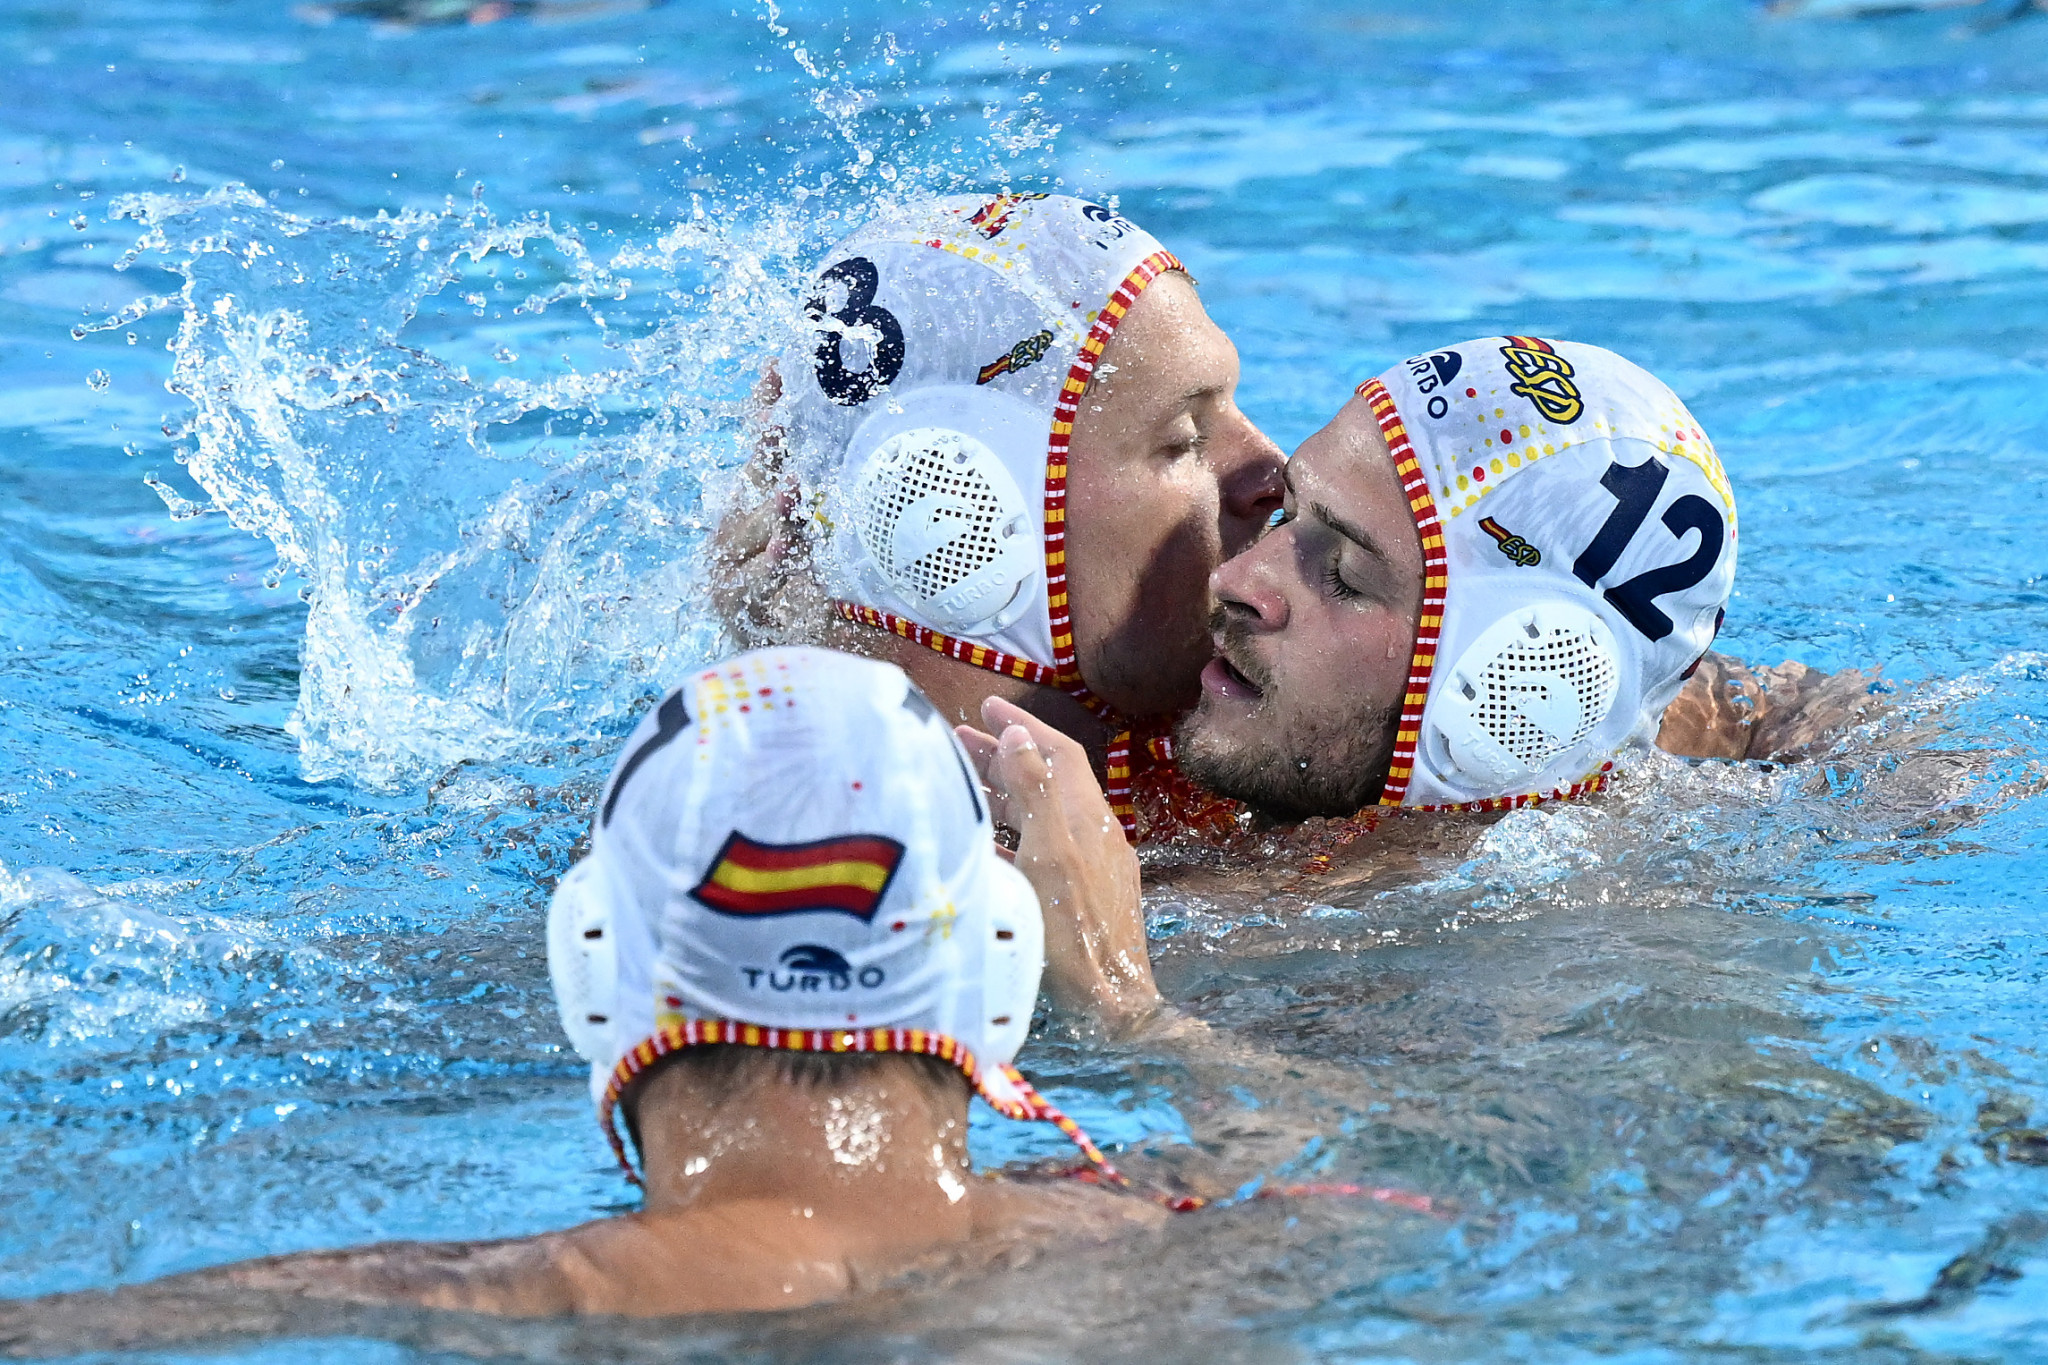 Spain beat Croatia 10-5 to reach their second consecutive FINA World Championships men's water polo semi-finals ©Getty Images